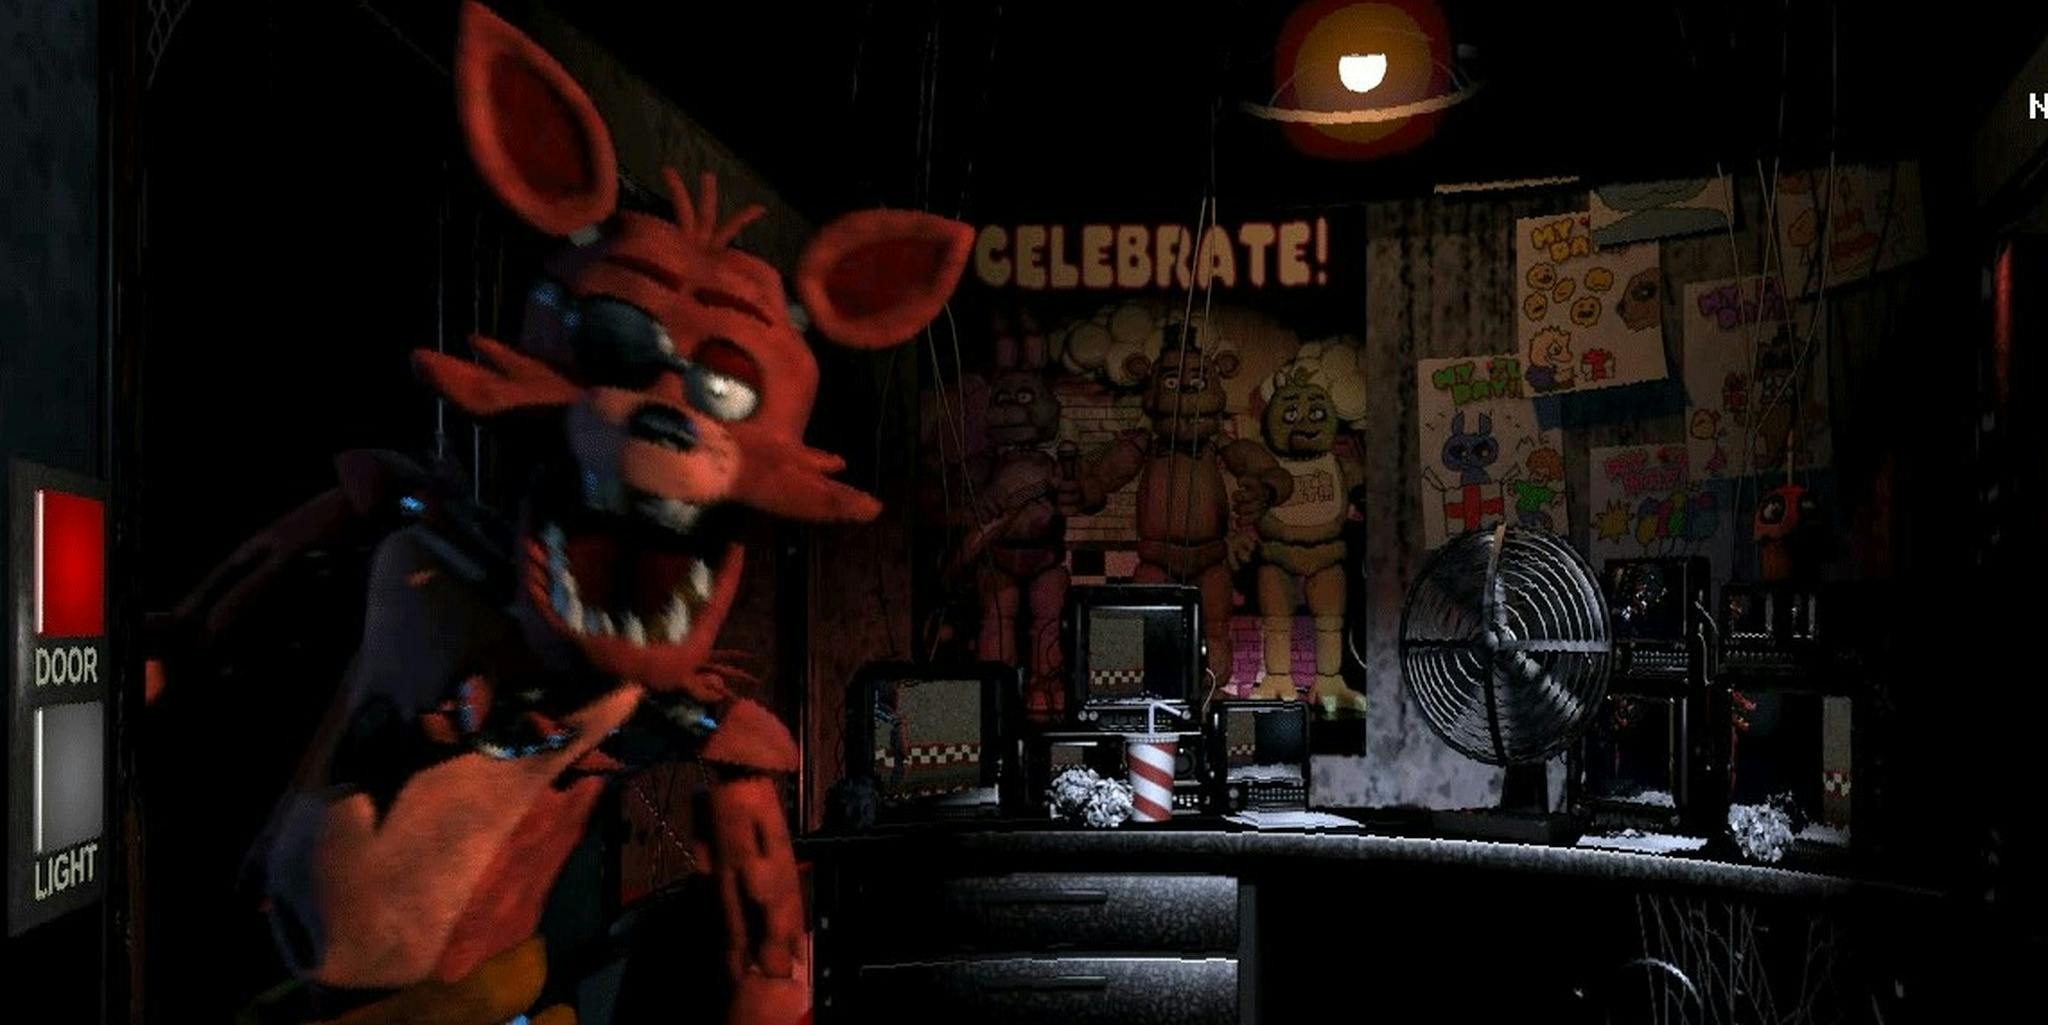 Five Nights in Anime 1,2 - All Jumpscares on Make a GIF